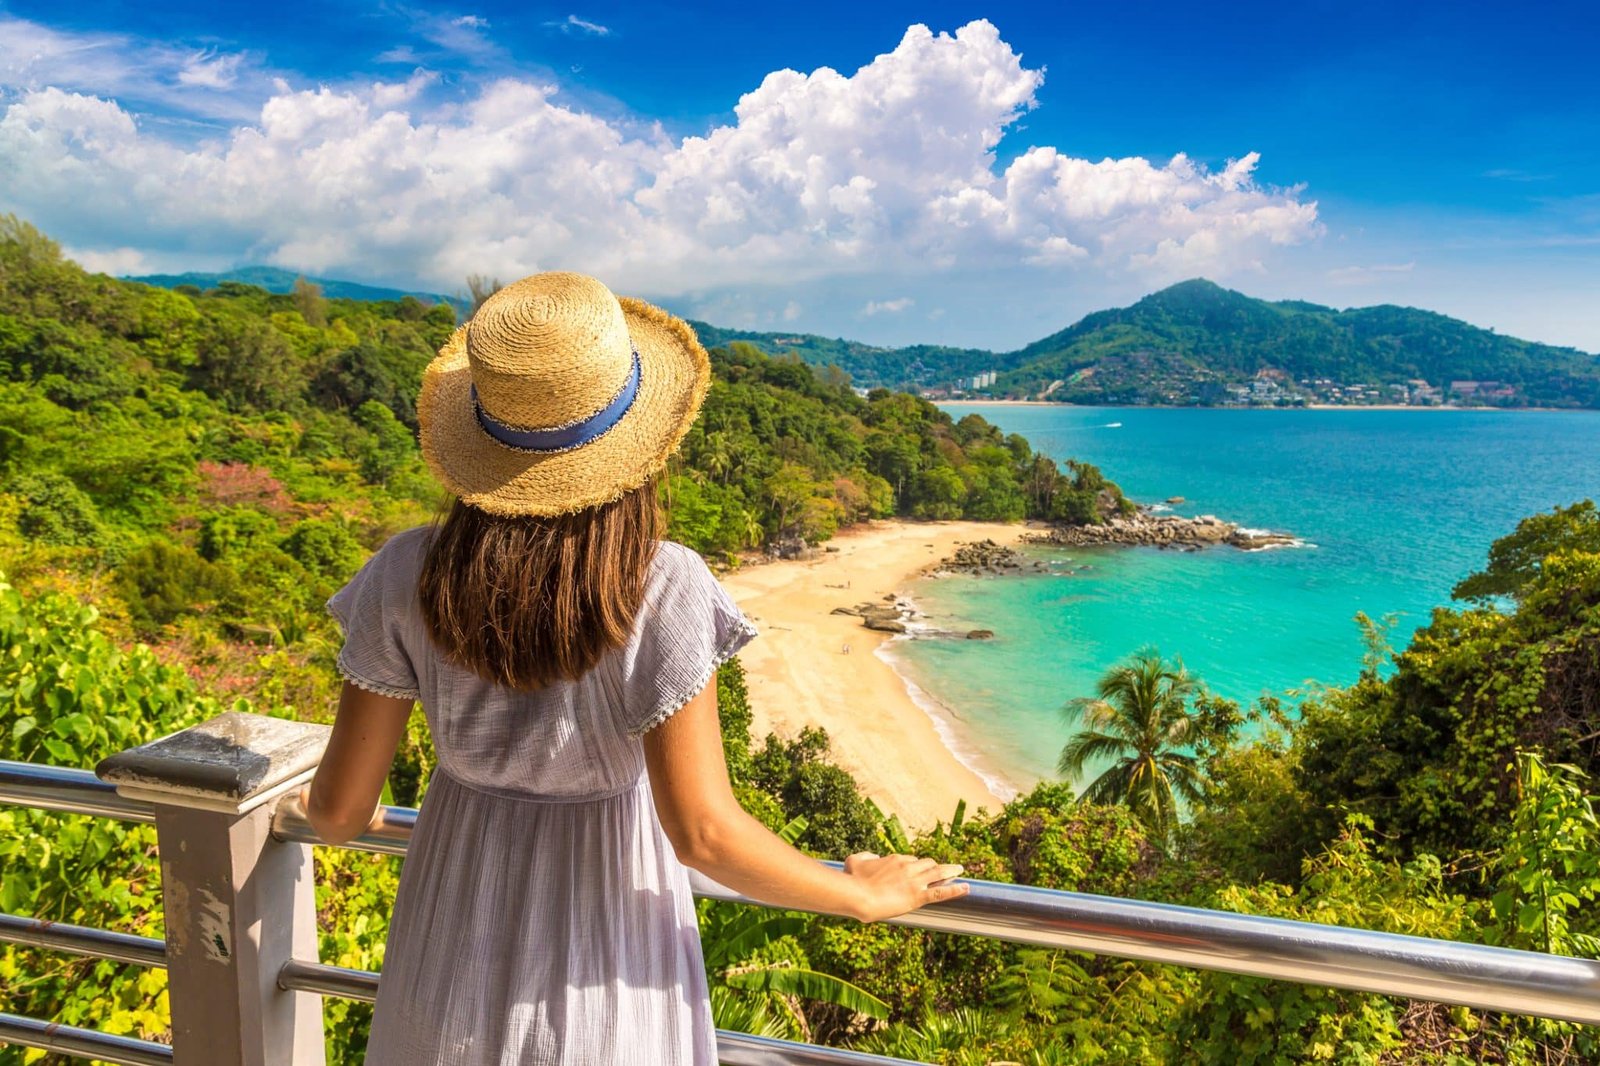 Woman traveler wearing blue dress and straw hat at Panoramic aerial view of Laem Sing beach on Phuket island, Thailand in a sunny day